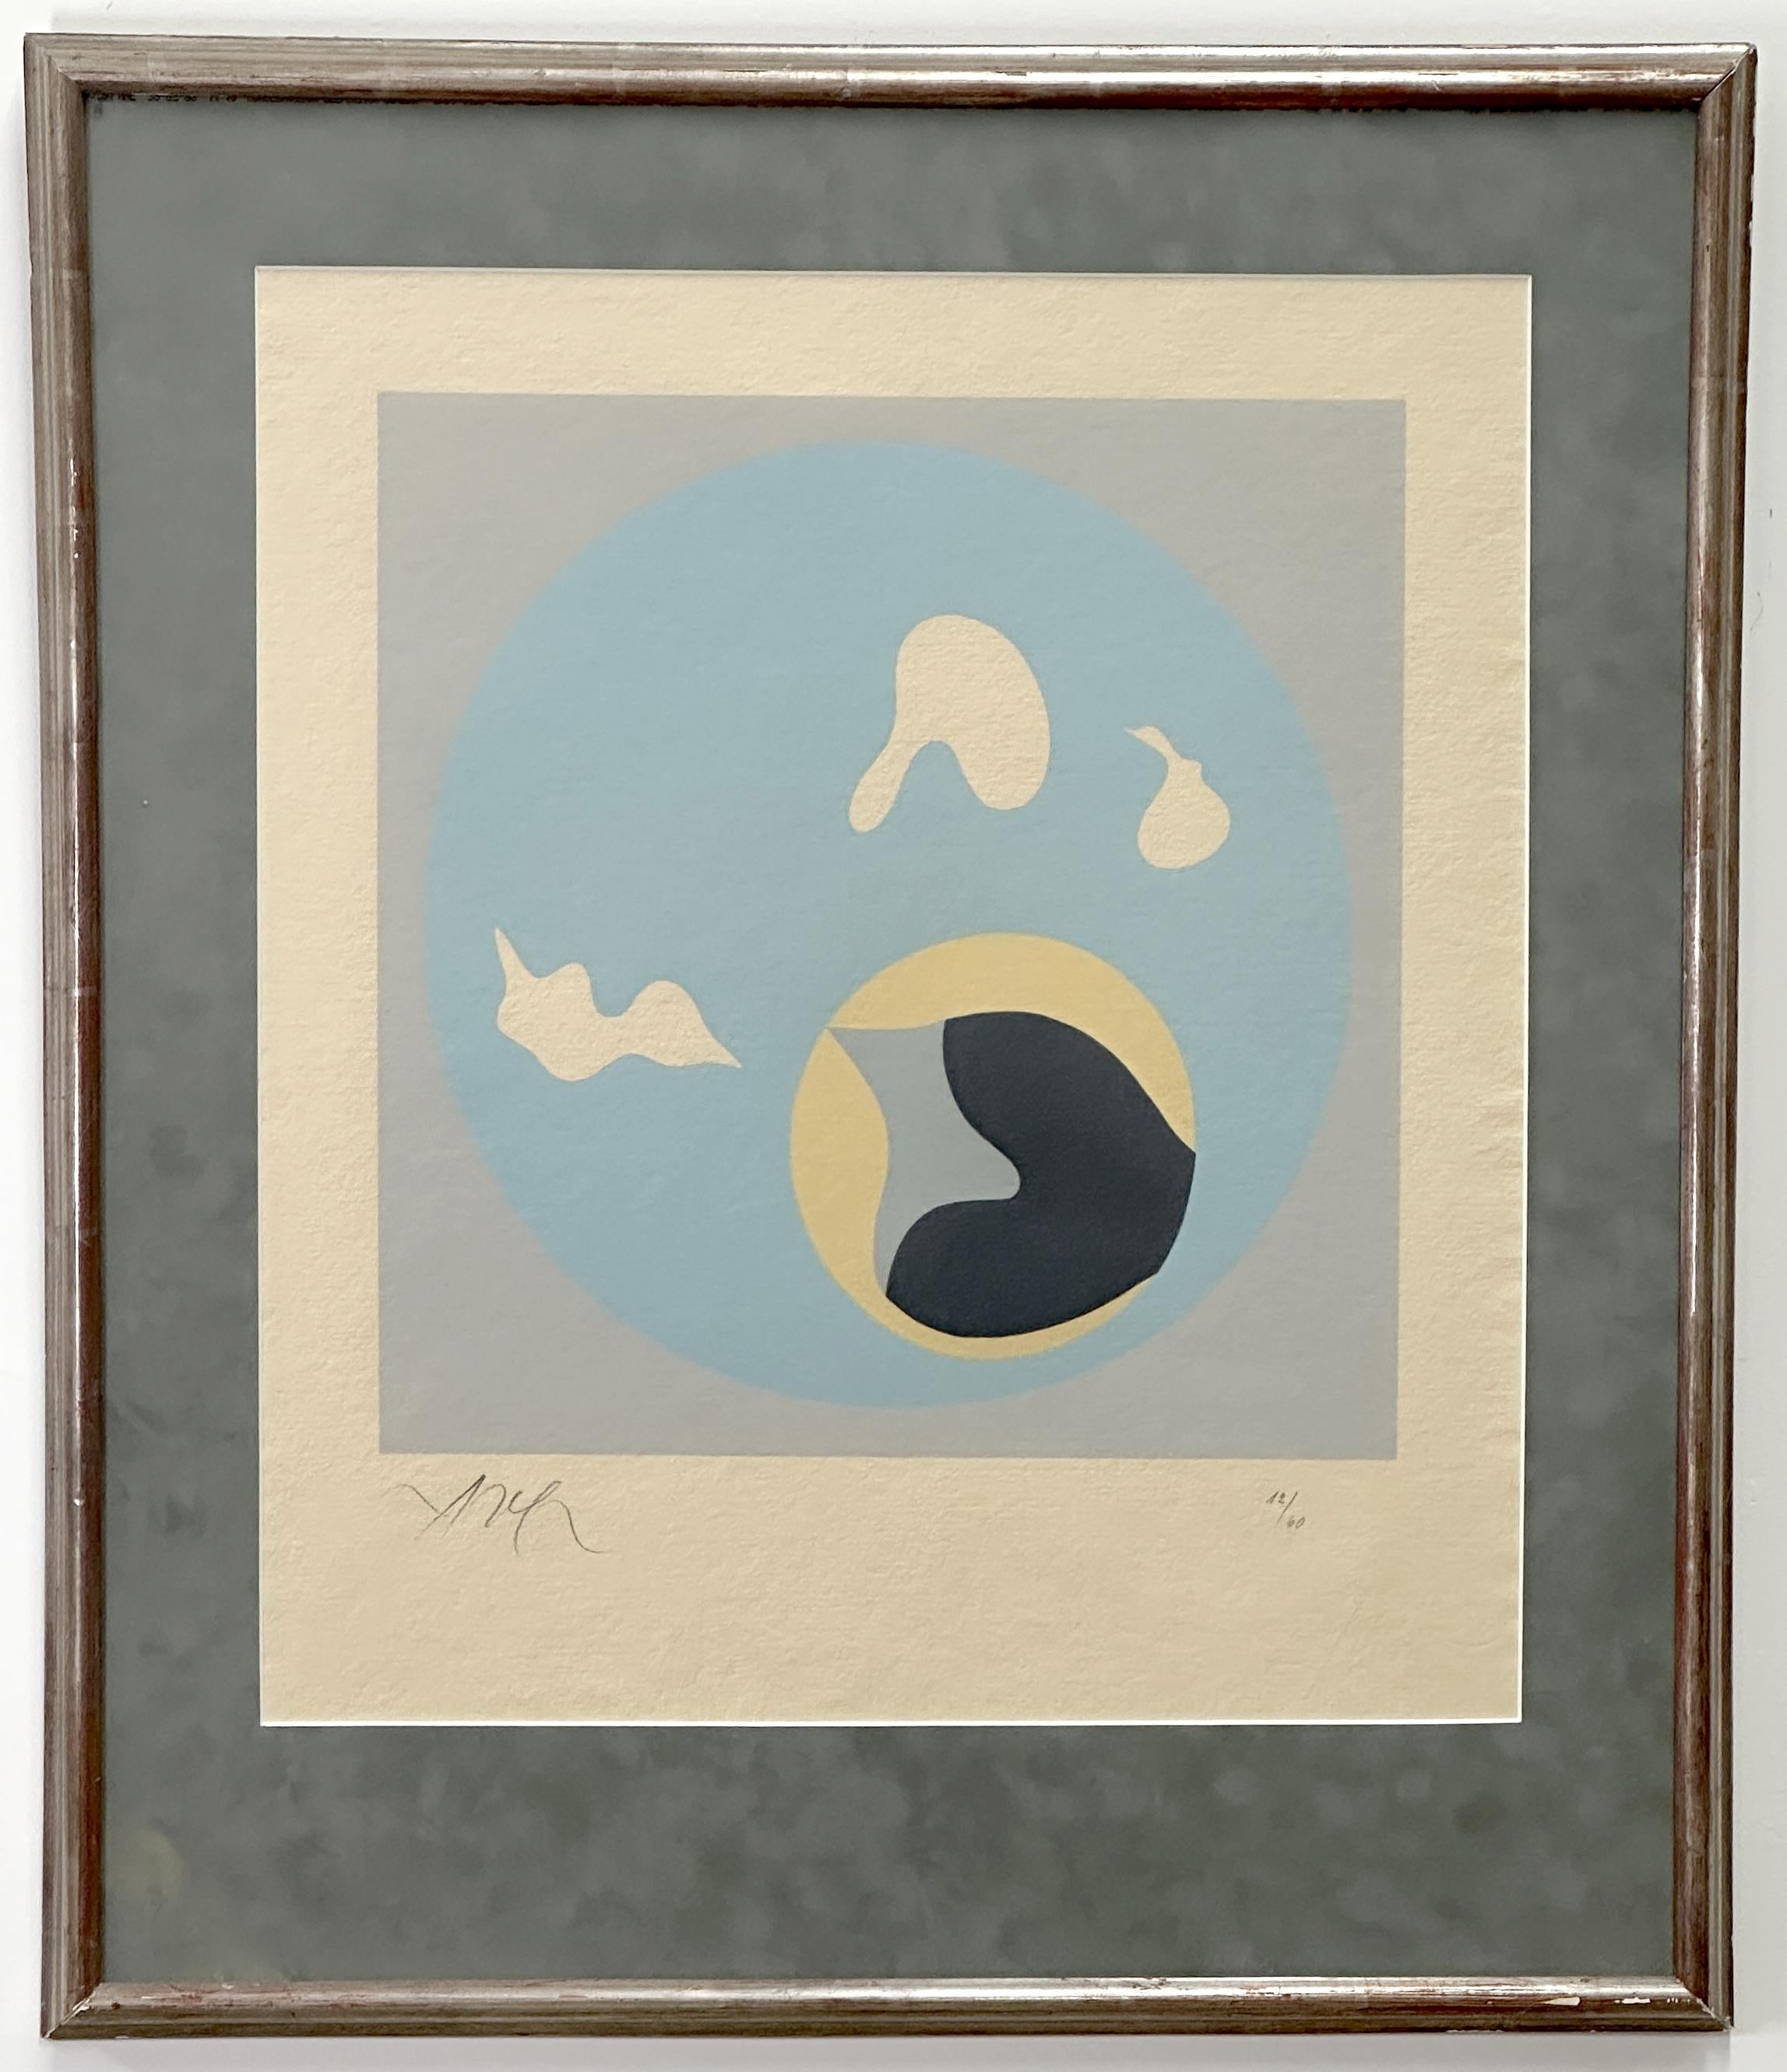 Jean Arp Abstract Print - Untitled from Le Soleil Recerclé 1966  Signed Limited Edition Woodcut Framed